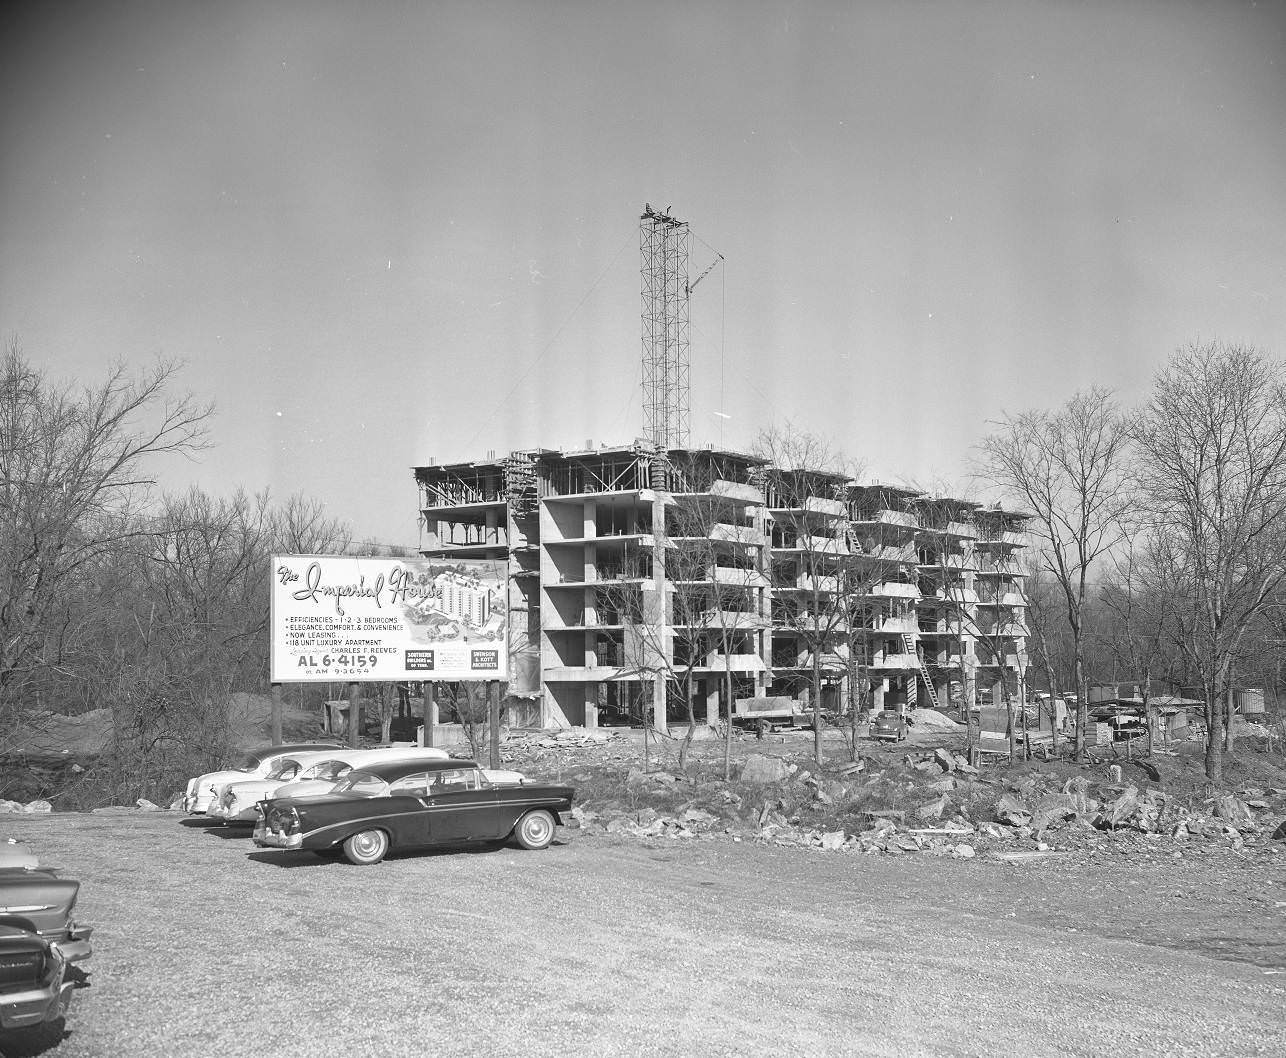 Continental Imperial House Apartments, Nashville, Tennessee, 1962